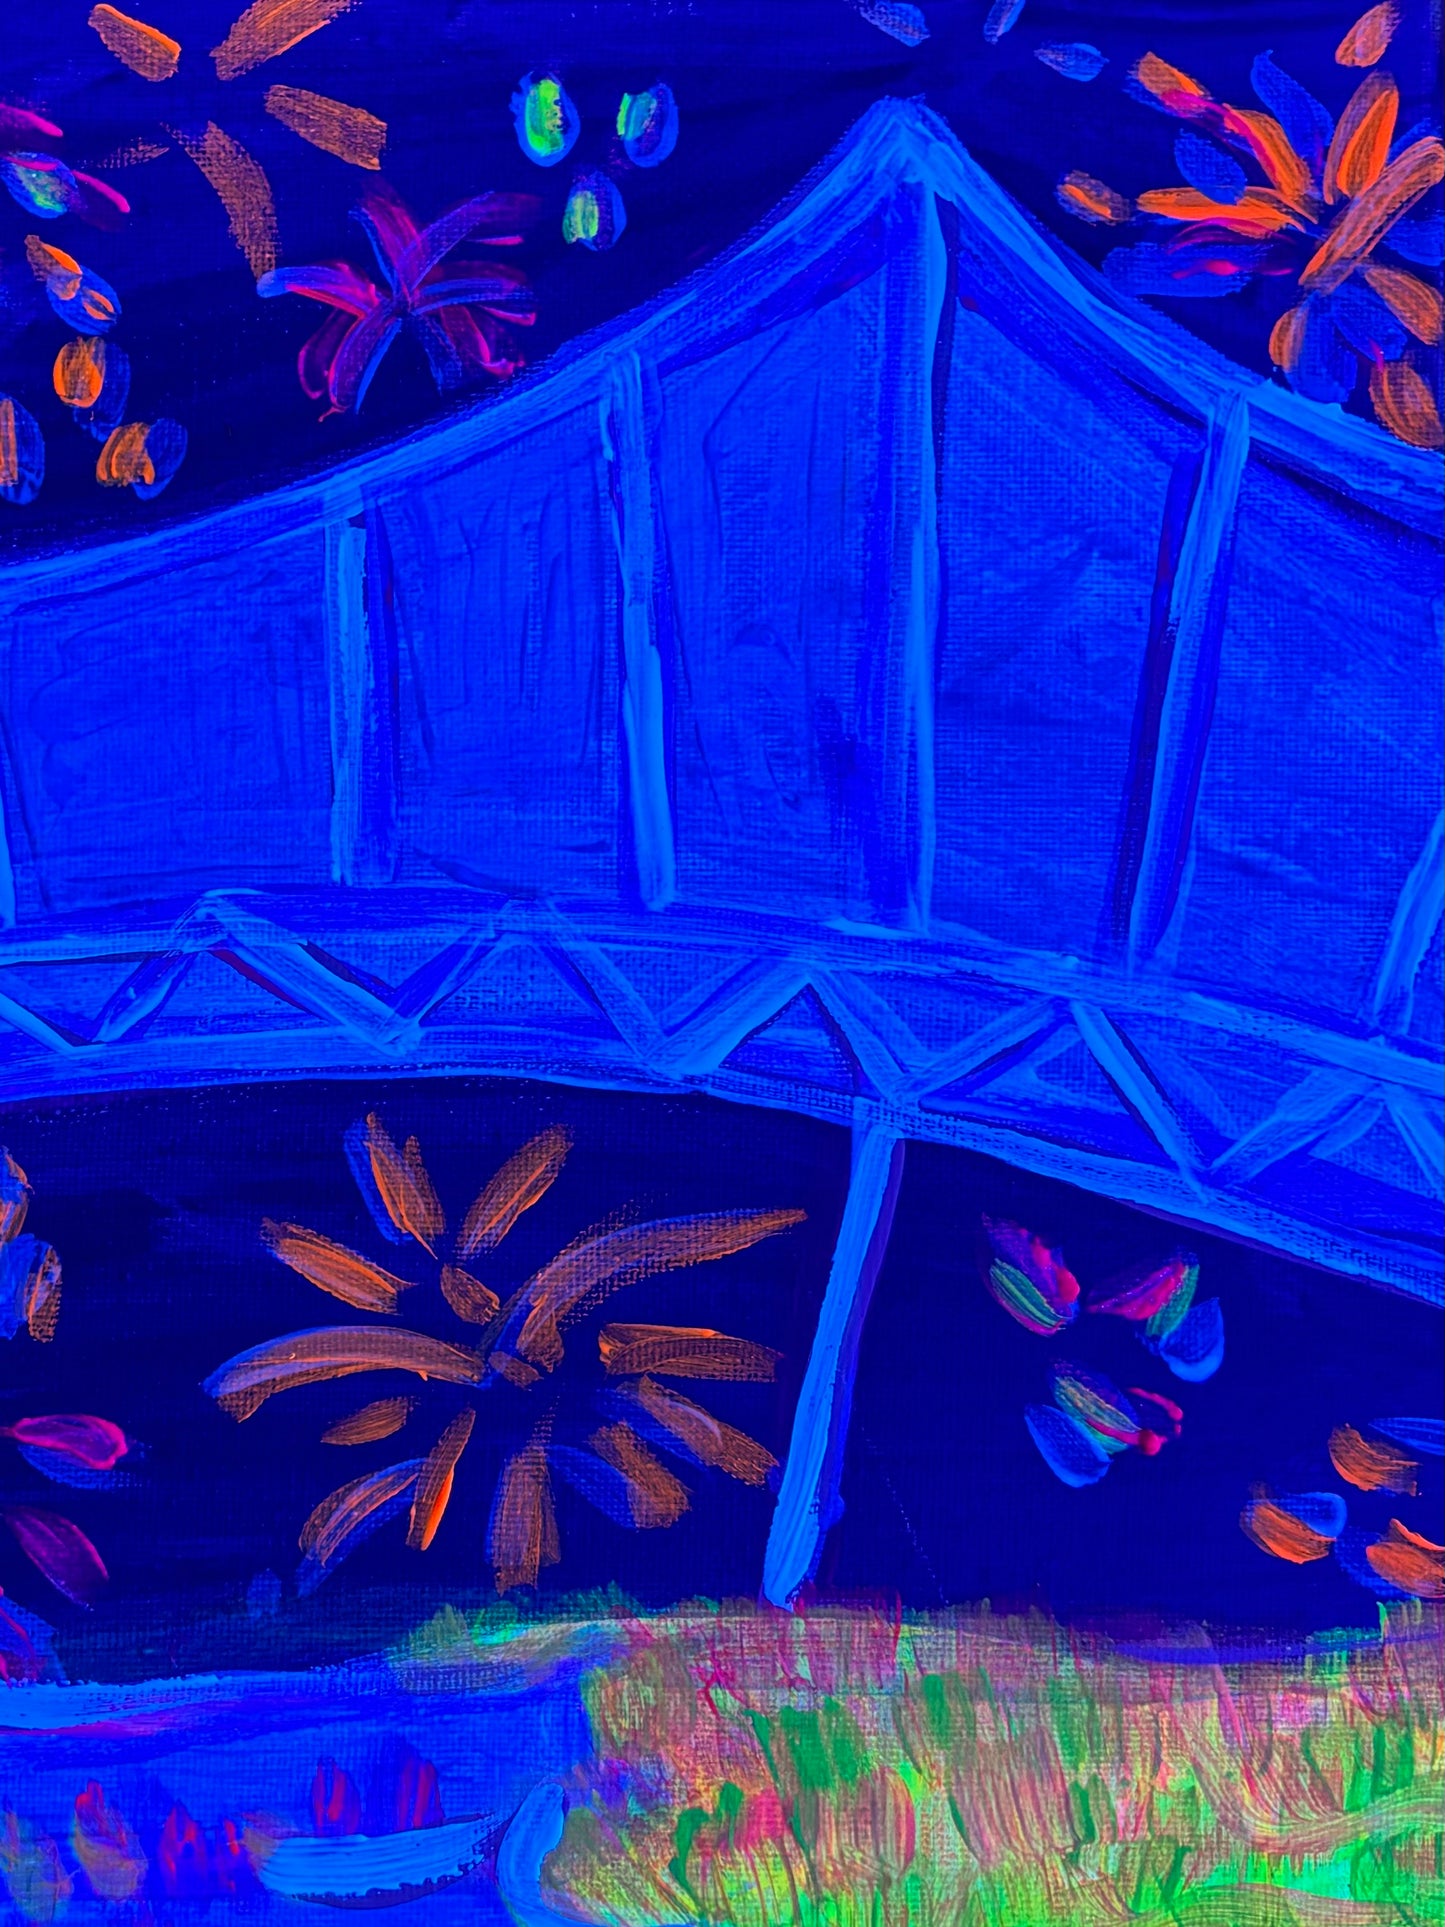 GLOW PAINTING "New Year's in Greenville!"